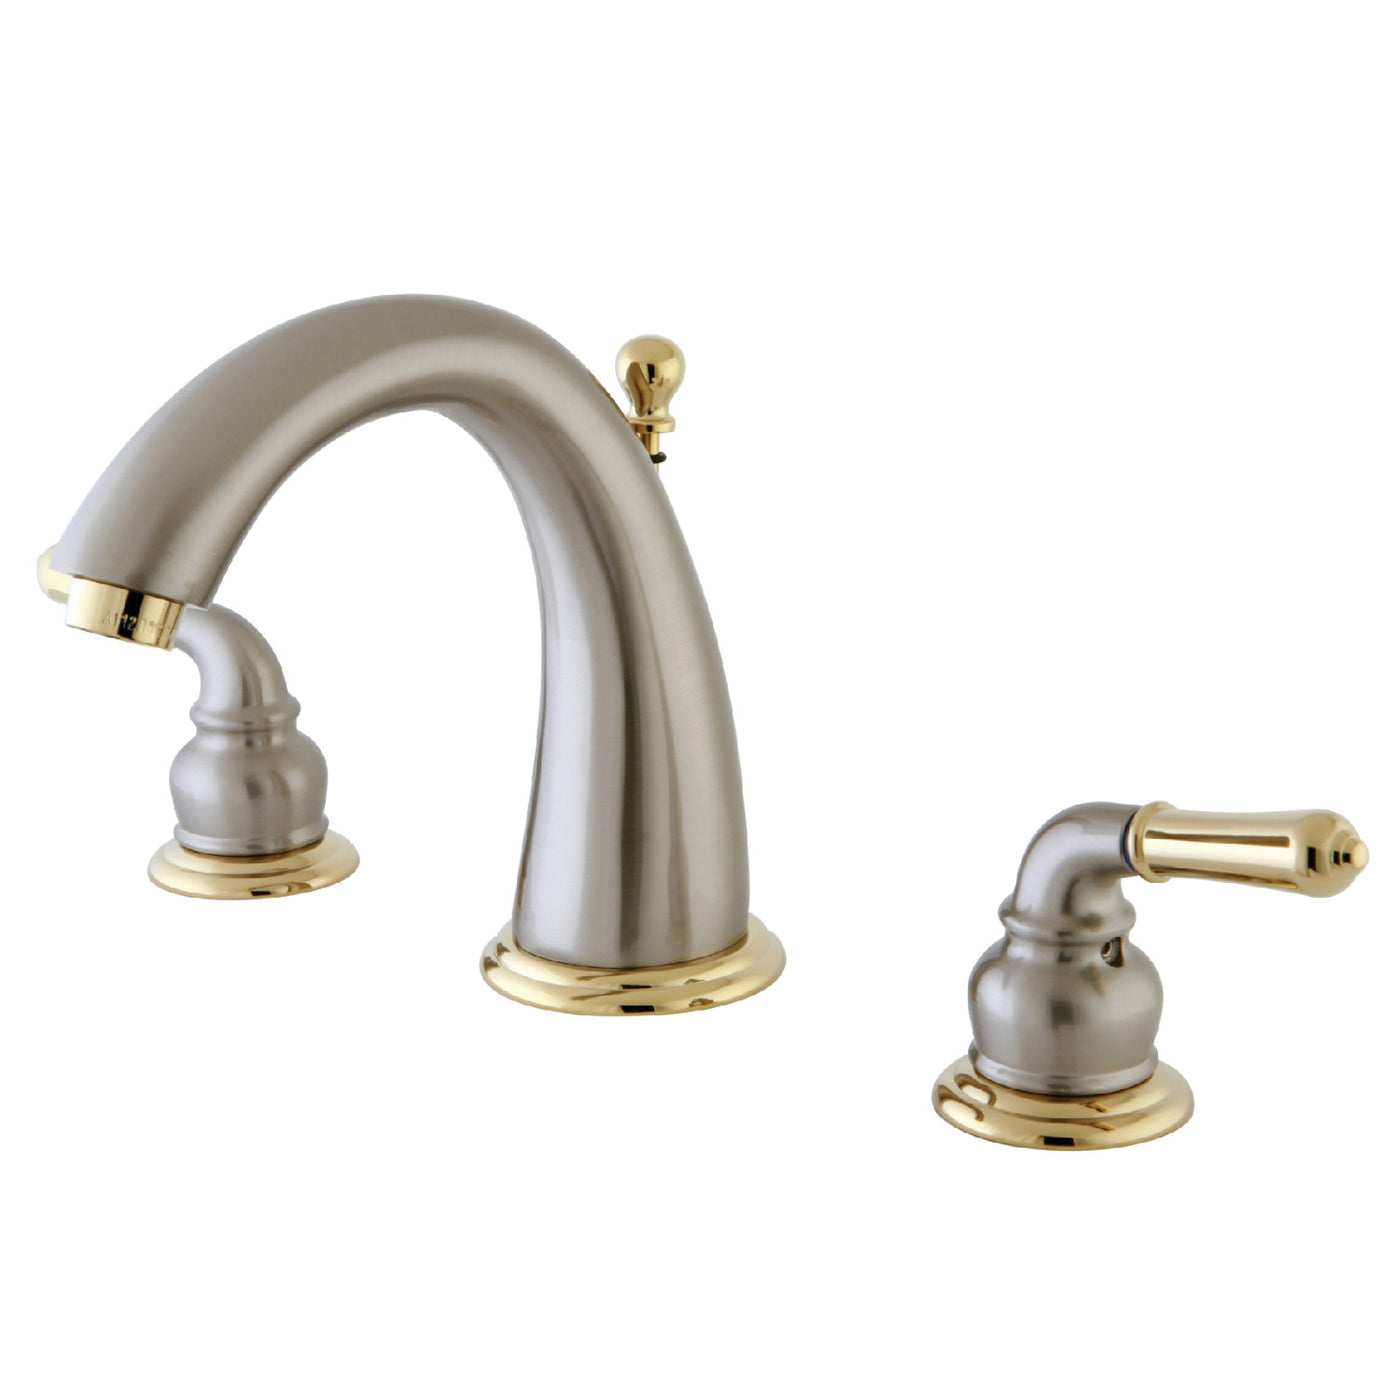 Elements of Design ES2969 Widespread Bathroom Faucet with Brass Pop-Up, Brushed Nickel/Polished Brass